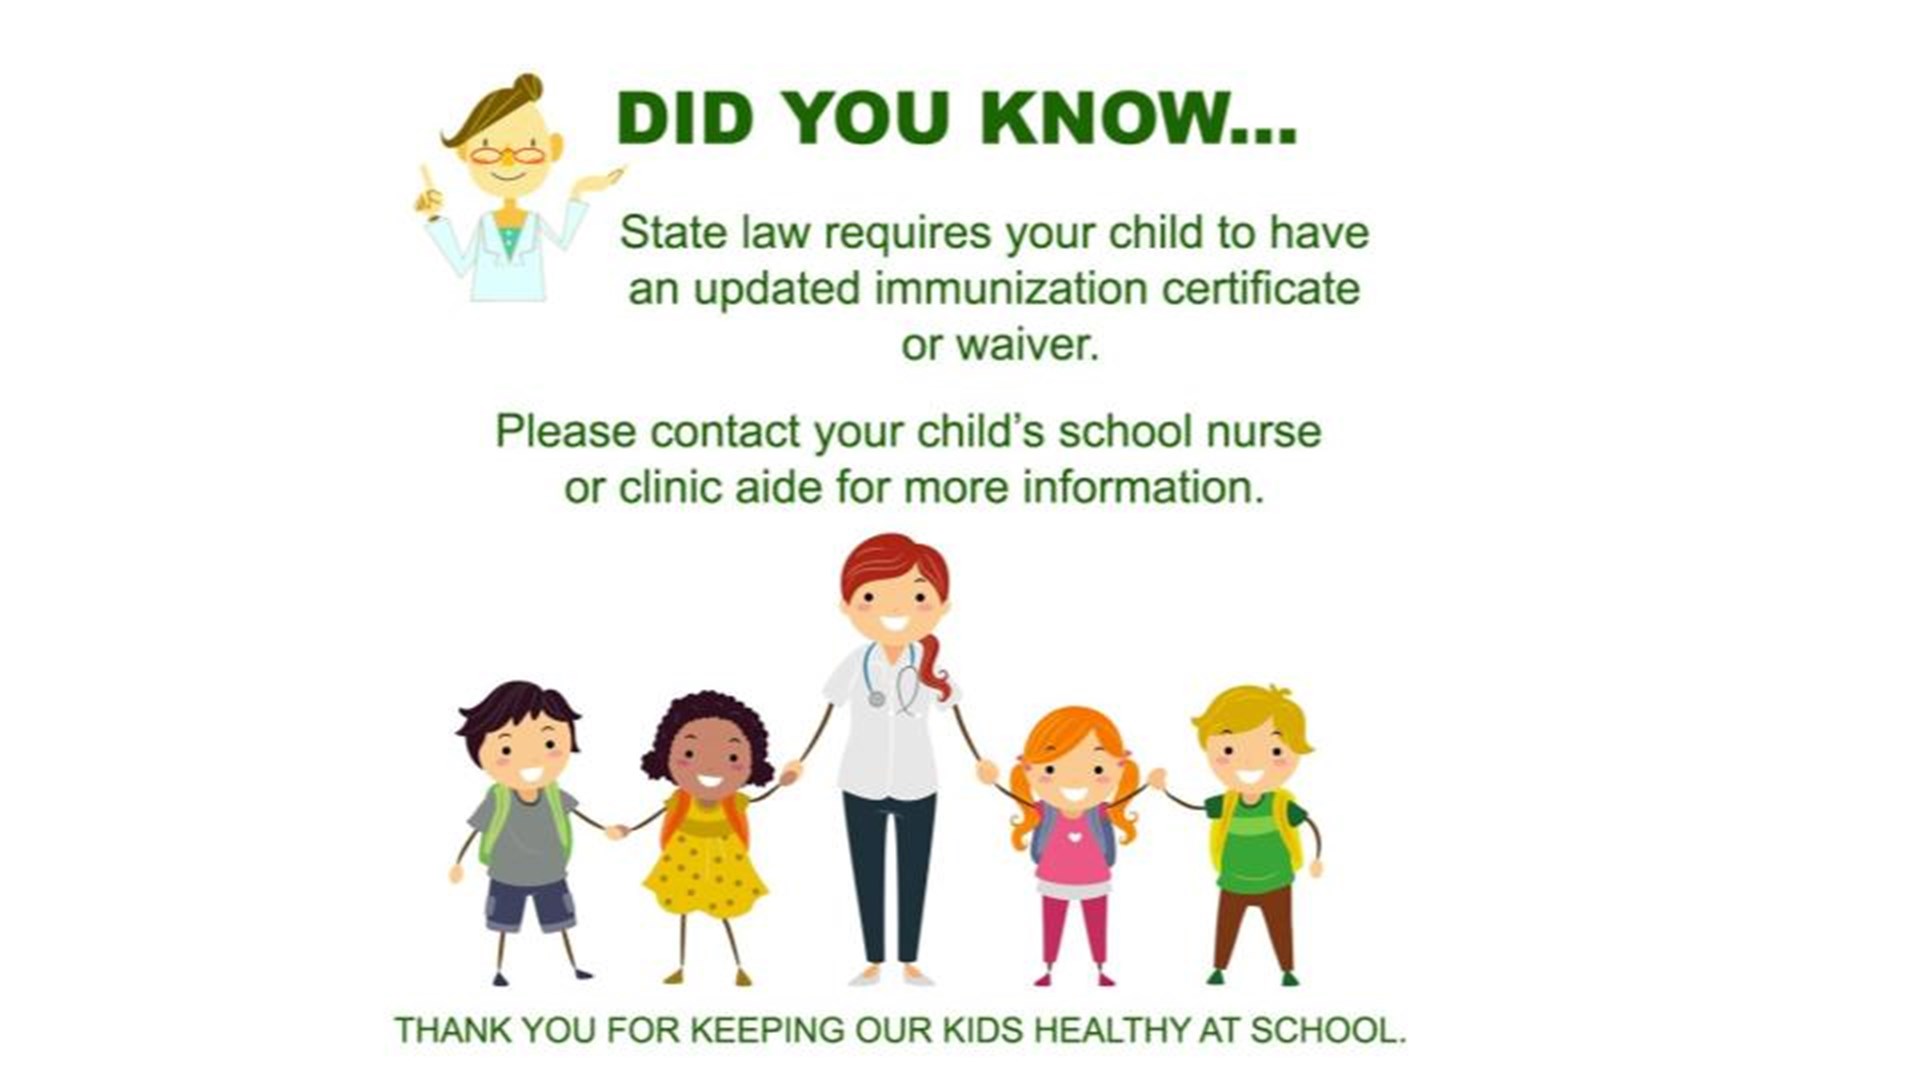 Thank you for keeping our kids healthy at school!